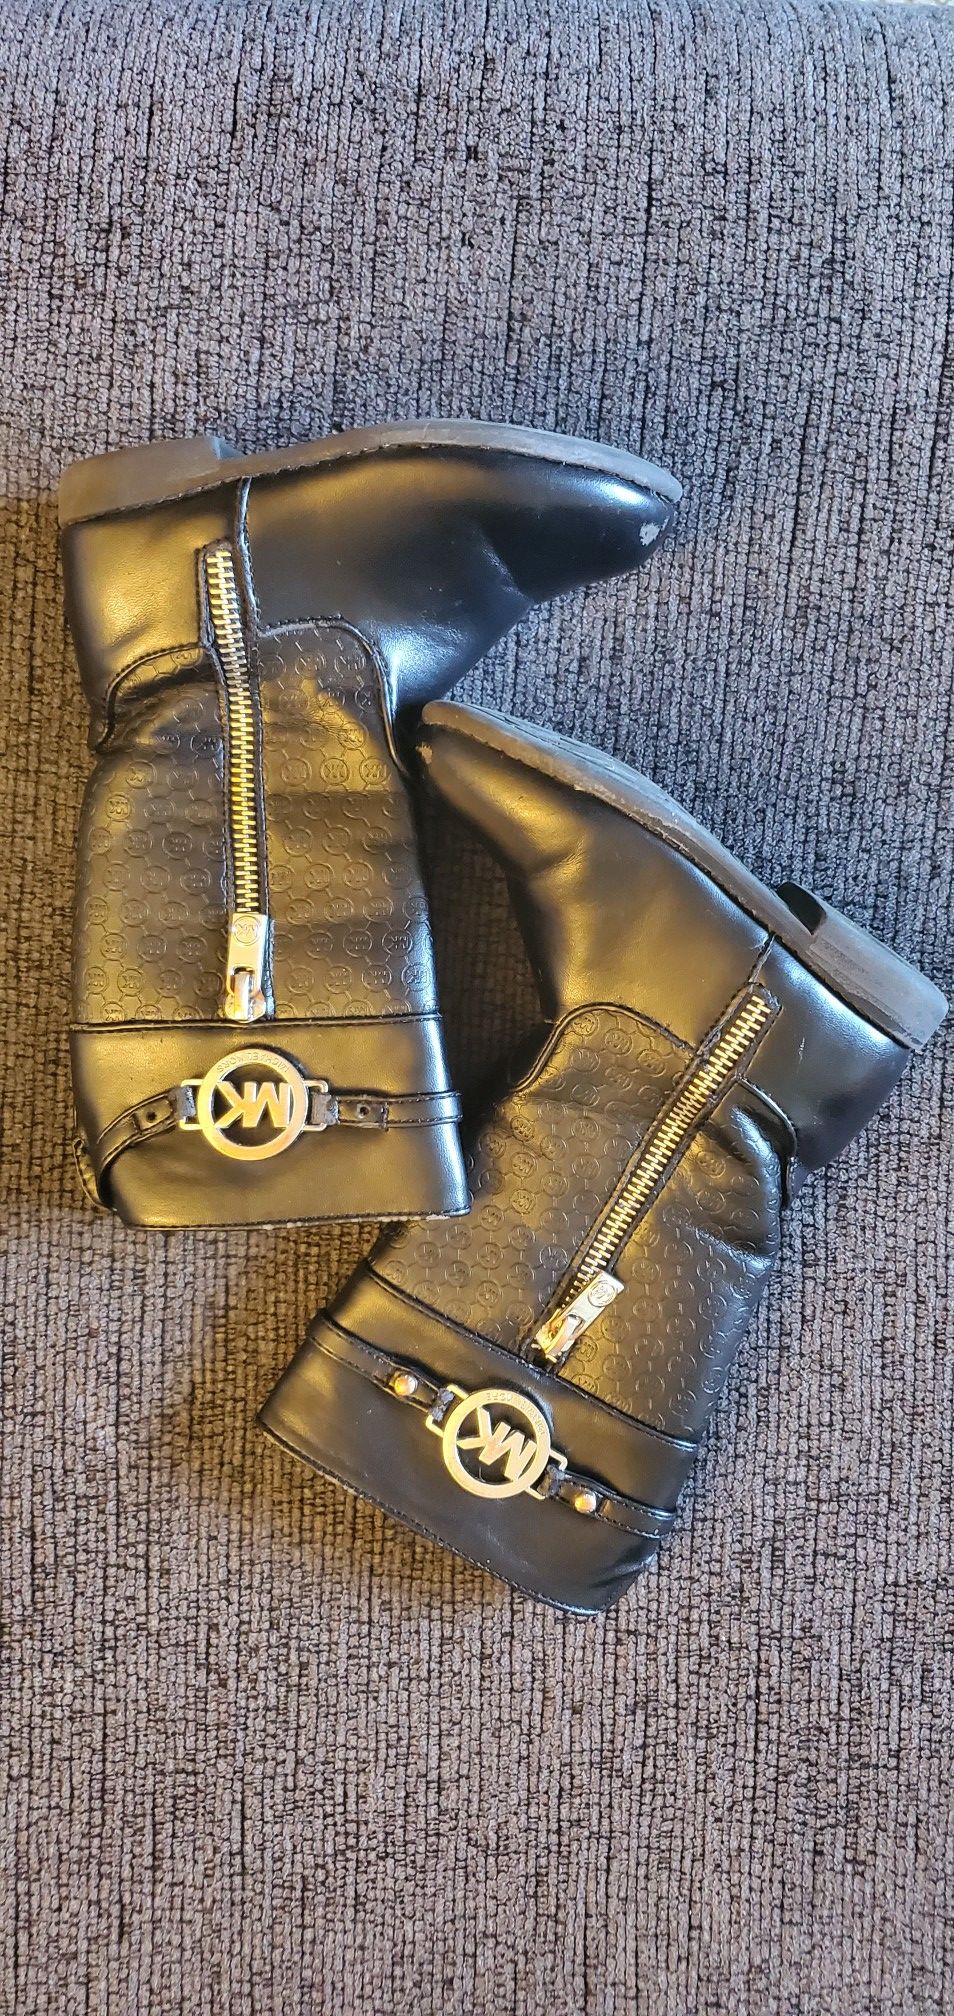 MK boots size 7